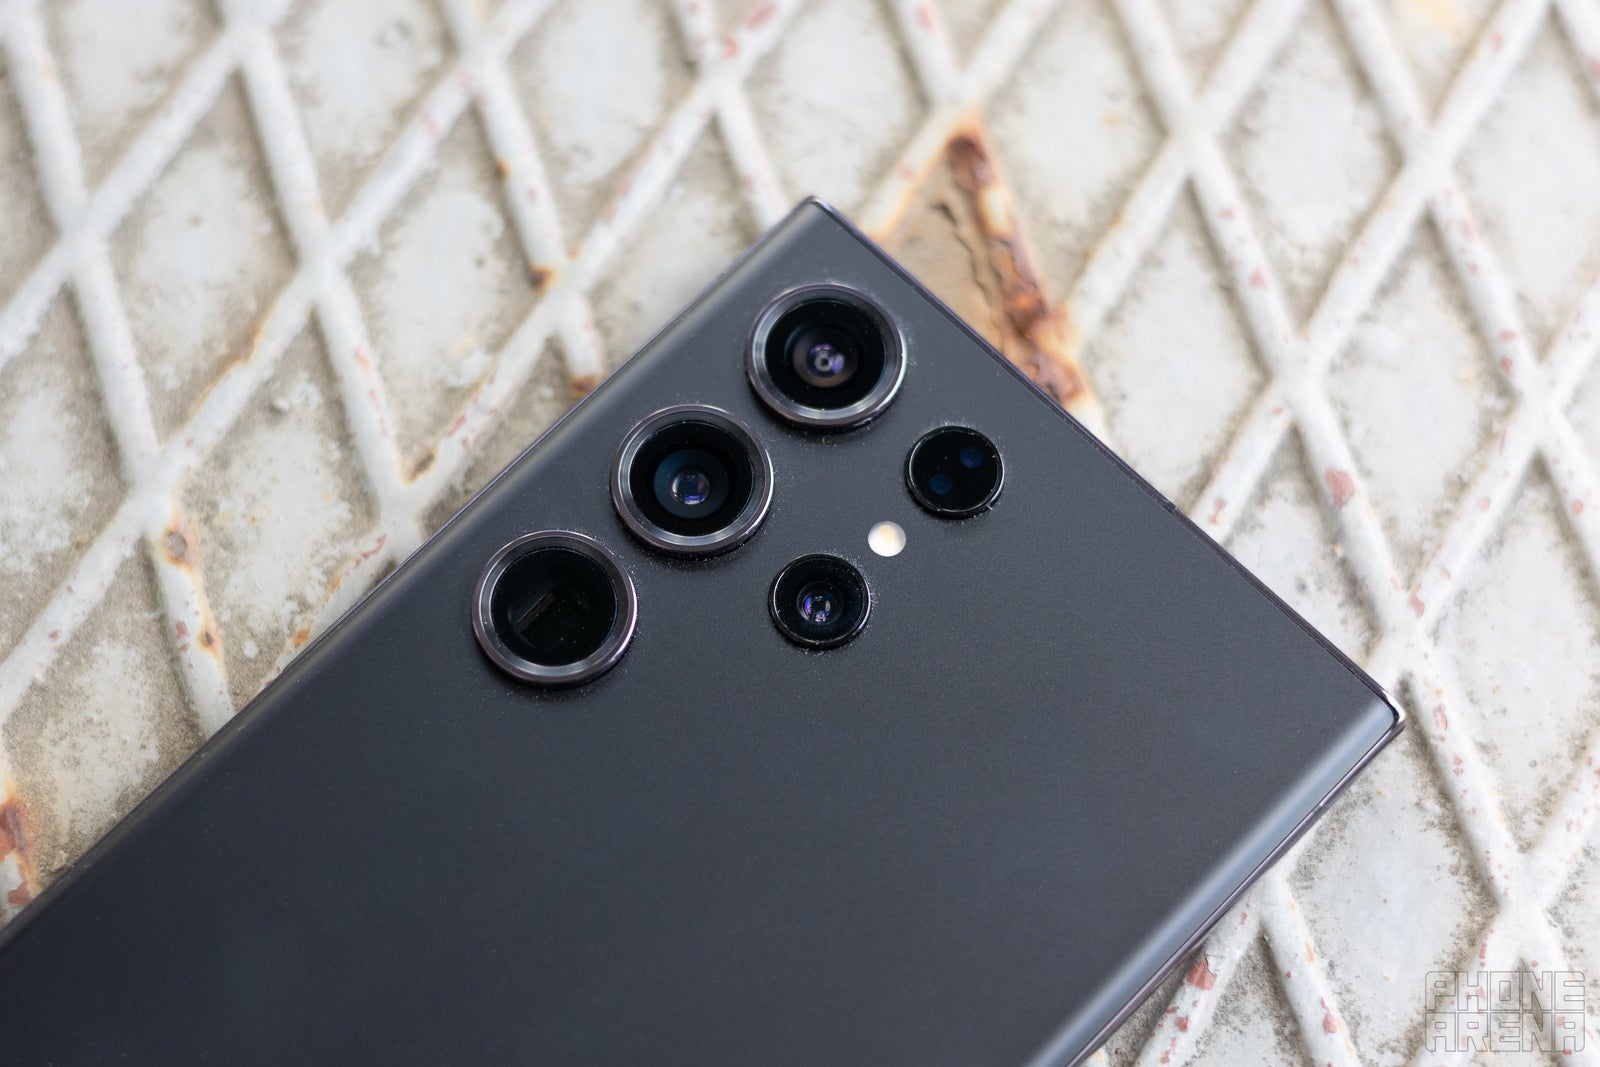 (Image Credit - PhoneArena) The camera rings are now larger and they are still an absolute dust trap - Samsung Galaxy S23 Ultra Review: no one big new feature, but so many smaller improvements!